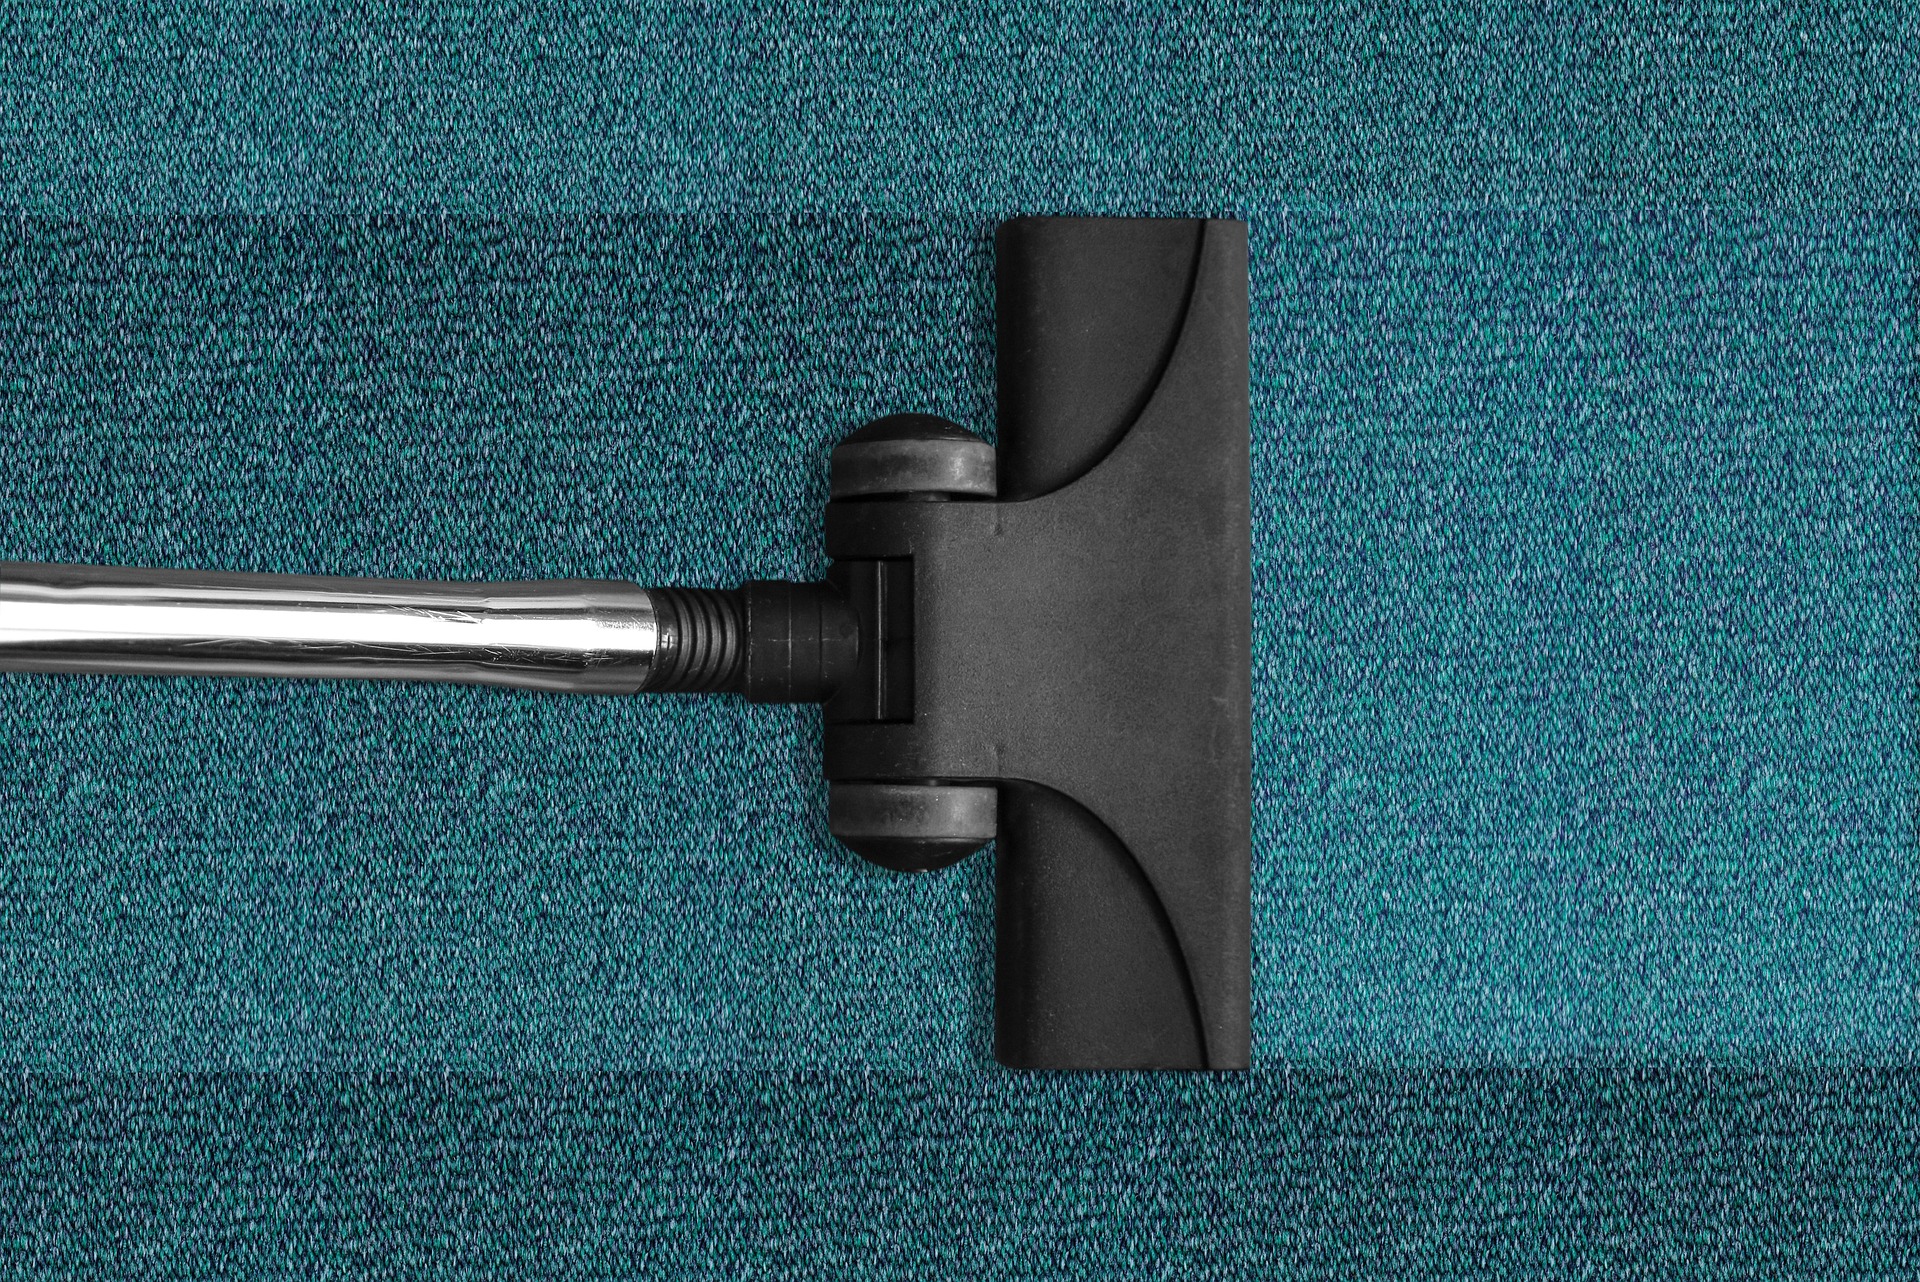 Image of vacuum cleaner on a blue carpet